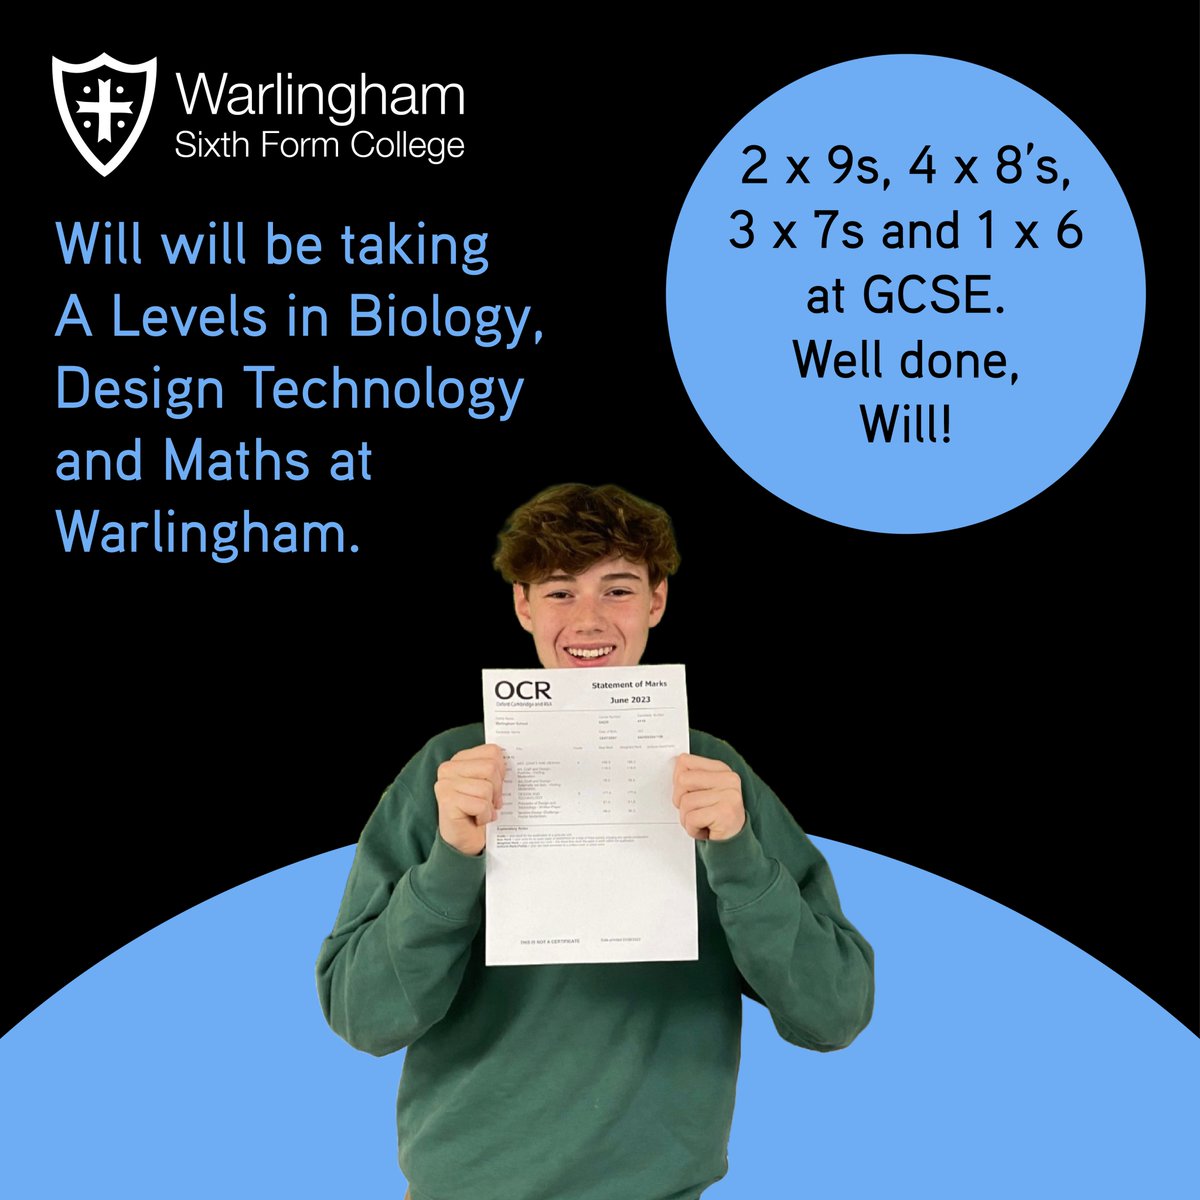 Warlingham Sixth Form College is now open for enrolment. Scan the QR code or go to bit.ly/3QNYoun to apply.